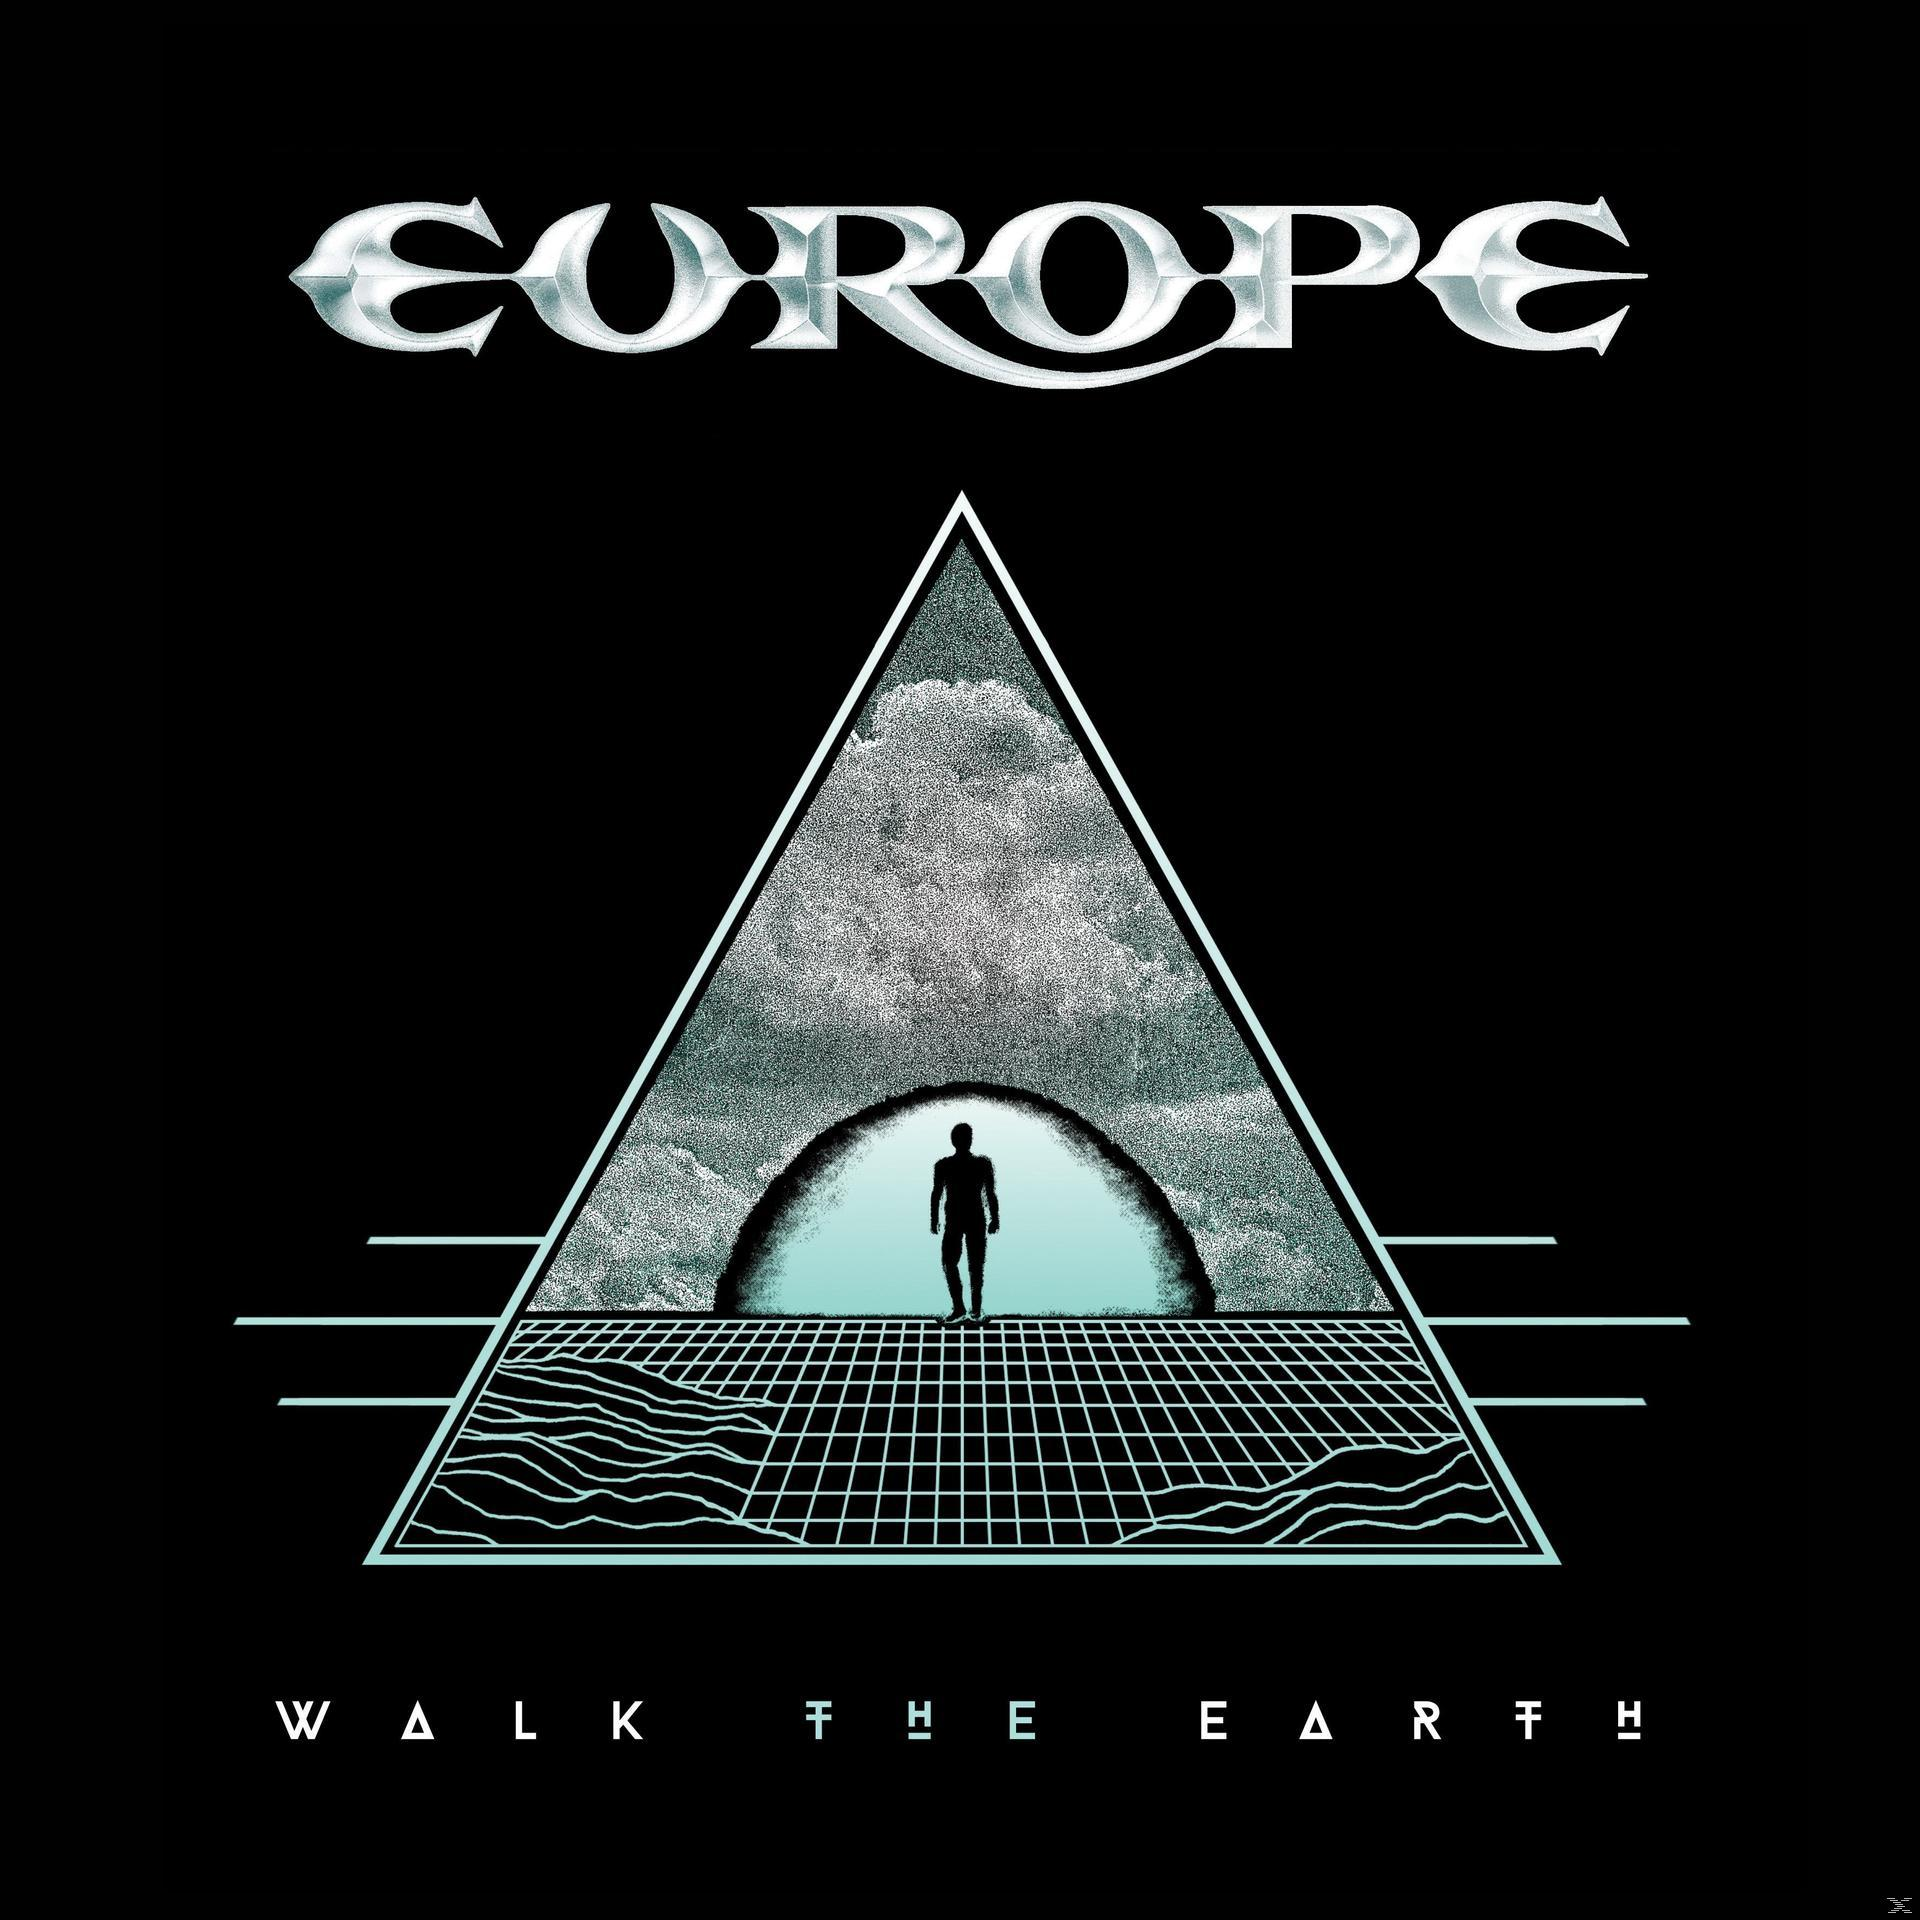 Video) Edition) The Walk - Europe (Special DVD Earth - (CD +